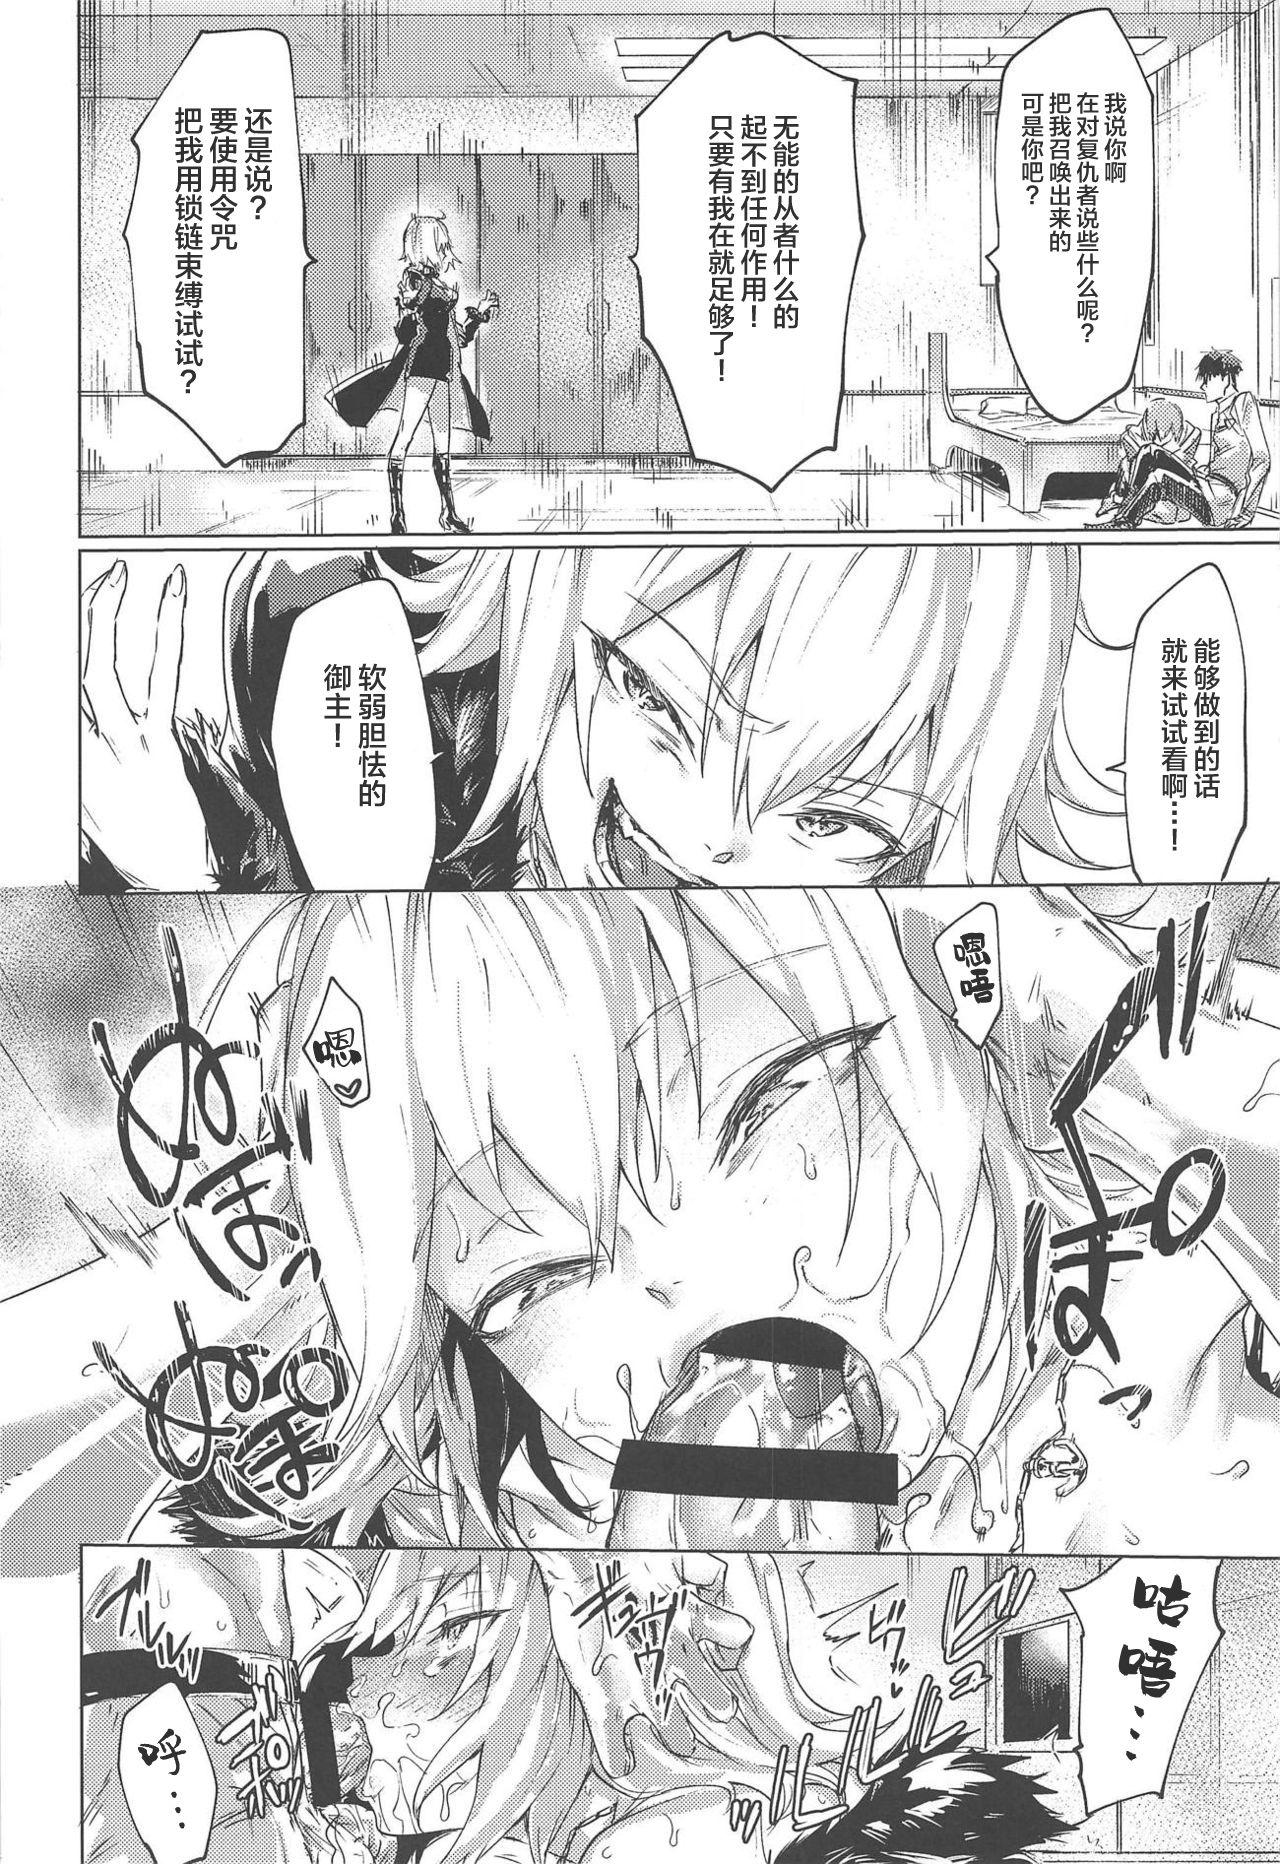 Wetpussy Iikagen ni Shite Kure!! Alter-san - Fate grand order Leather - Page 4